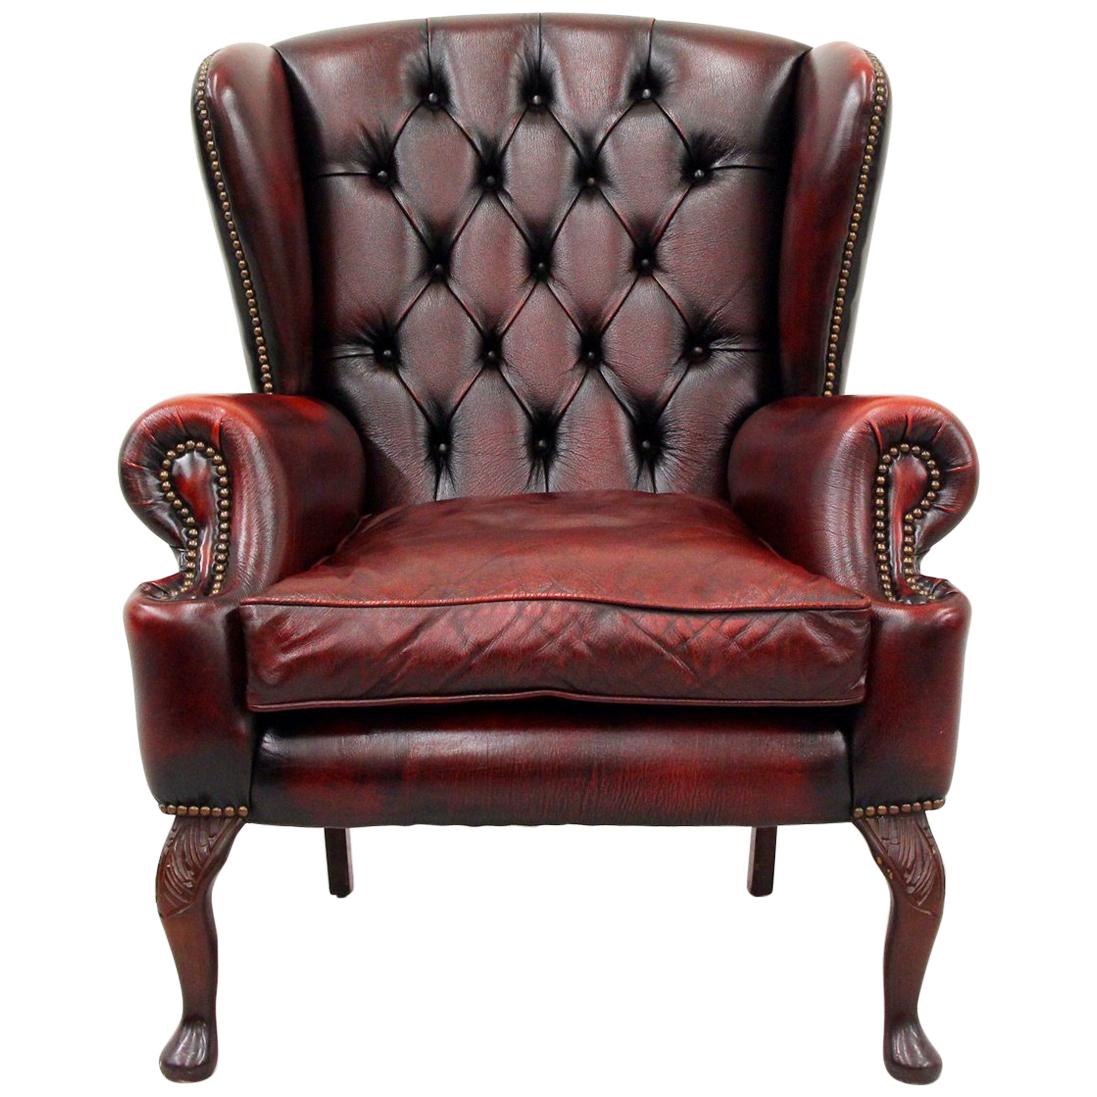 Chesterfield Wing Chair Armchair Club Chair Baroque Antique For Sale